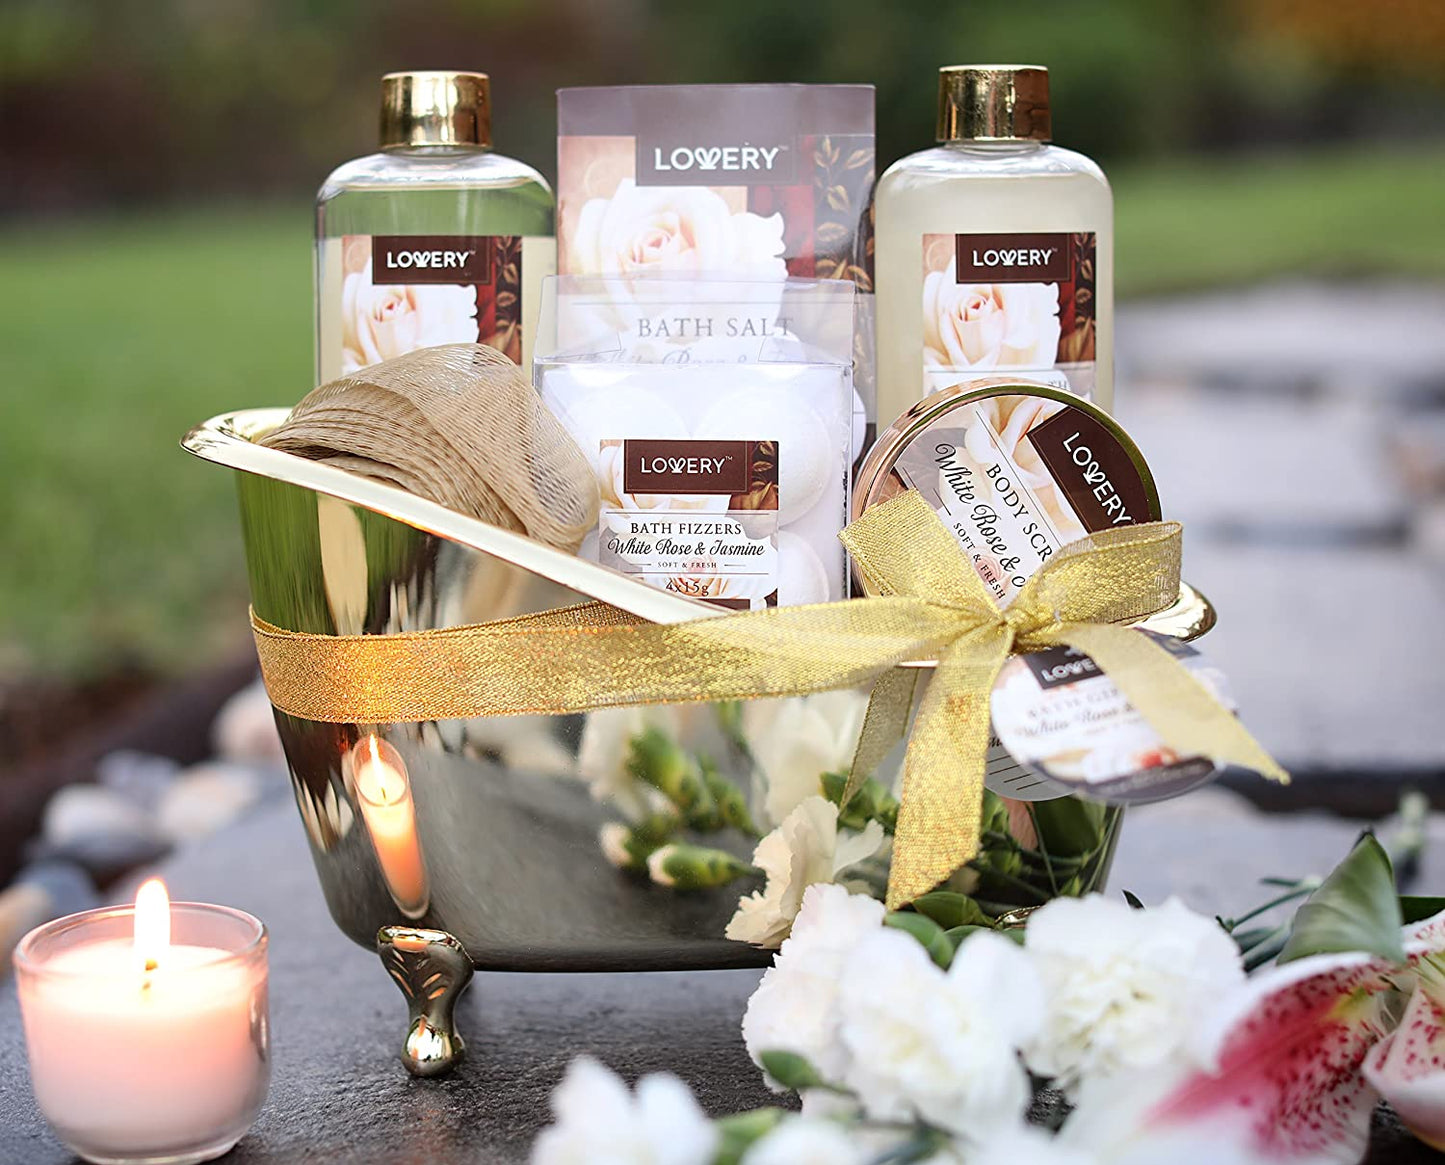 Lovery White Rose & Jasmine Set, White Rose & Jasmine Gift Set, White Rose & Jasmine Bath and Body Gift Basket, Bath & Body Kit, Bath and Body Cosmetics, All Natural, Vitamin E, Shea Butter, Self-Care Package, Hydrating Skin Care, Gift Bath Set, Perfect Gift, Spa Set 